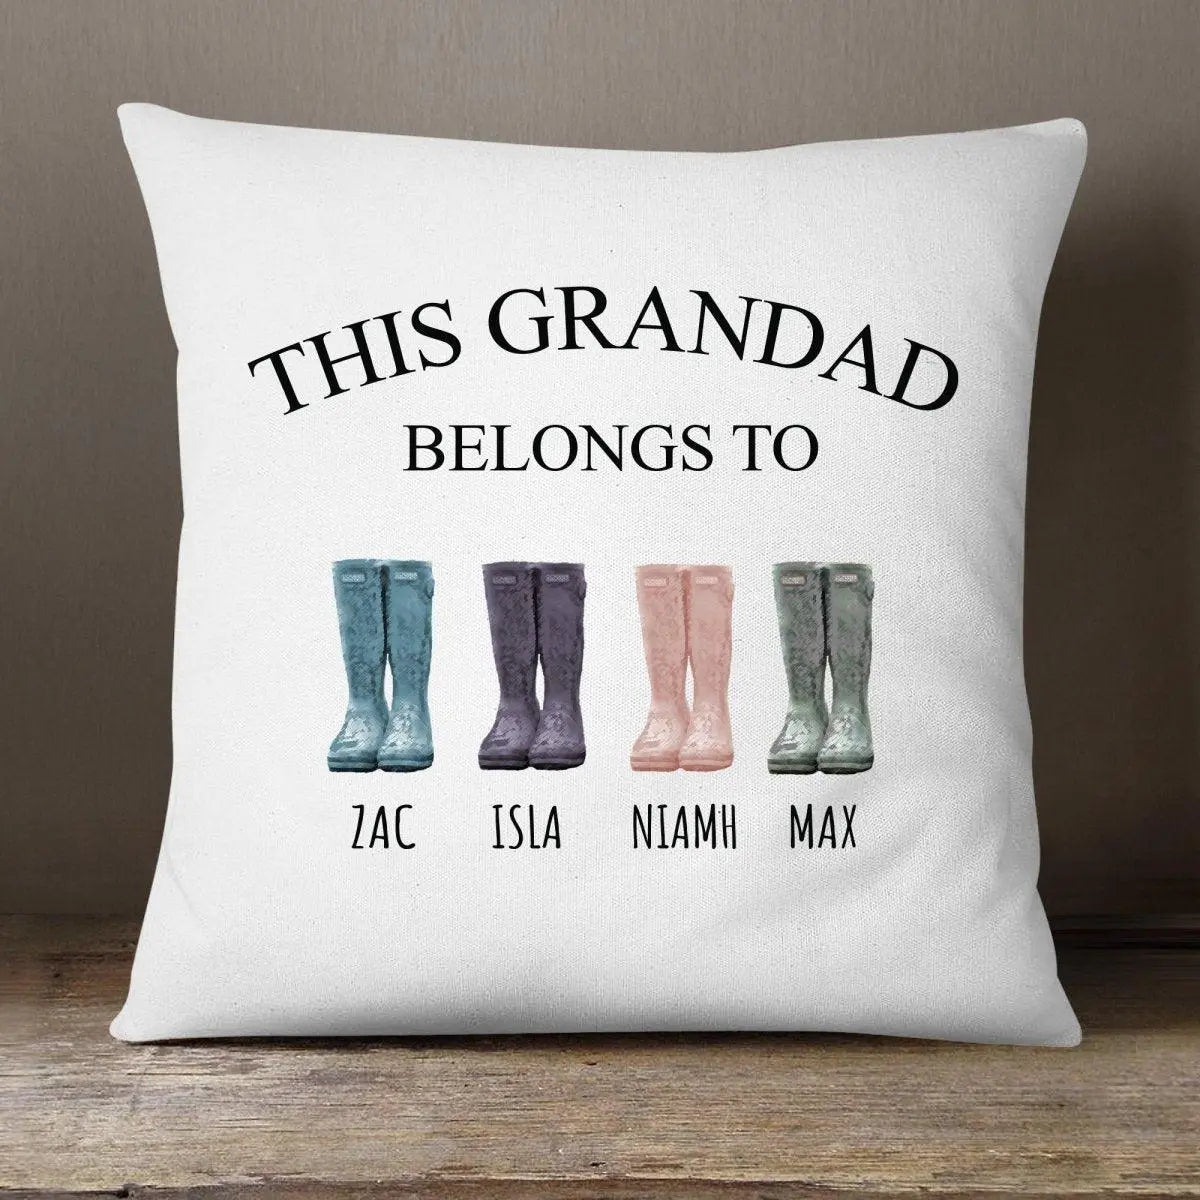 Personalised Grandad Belongs To Cushion, Fathers Day Gift, Gift For Grandad, Grand Children Fathers Day Gift, Dad Gift, Names, For Him - Amy Lucy